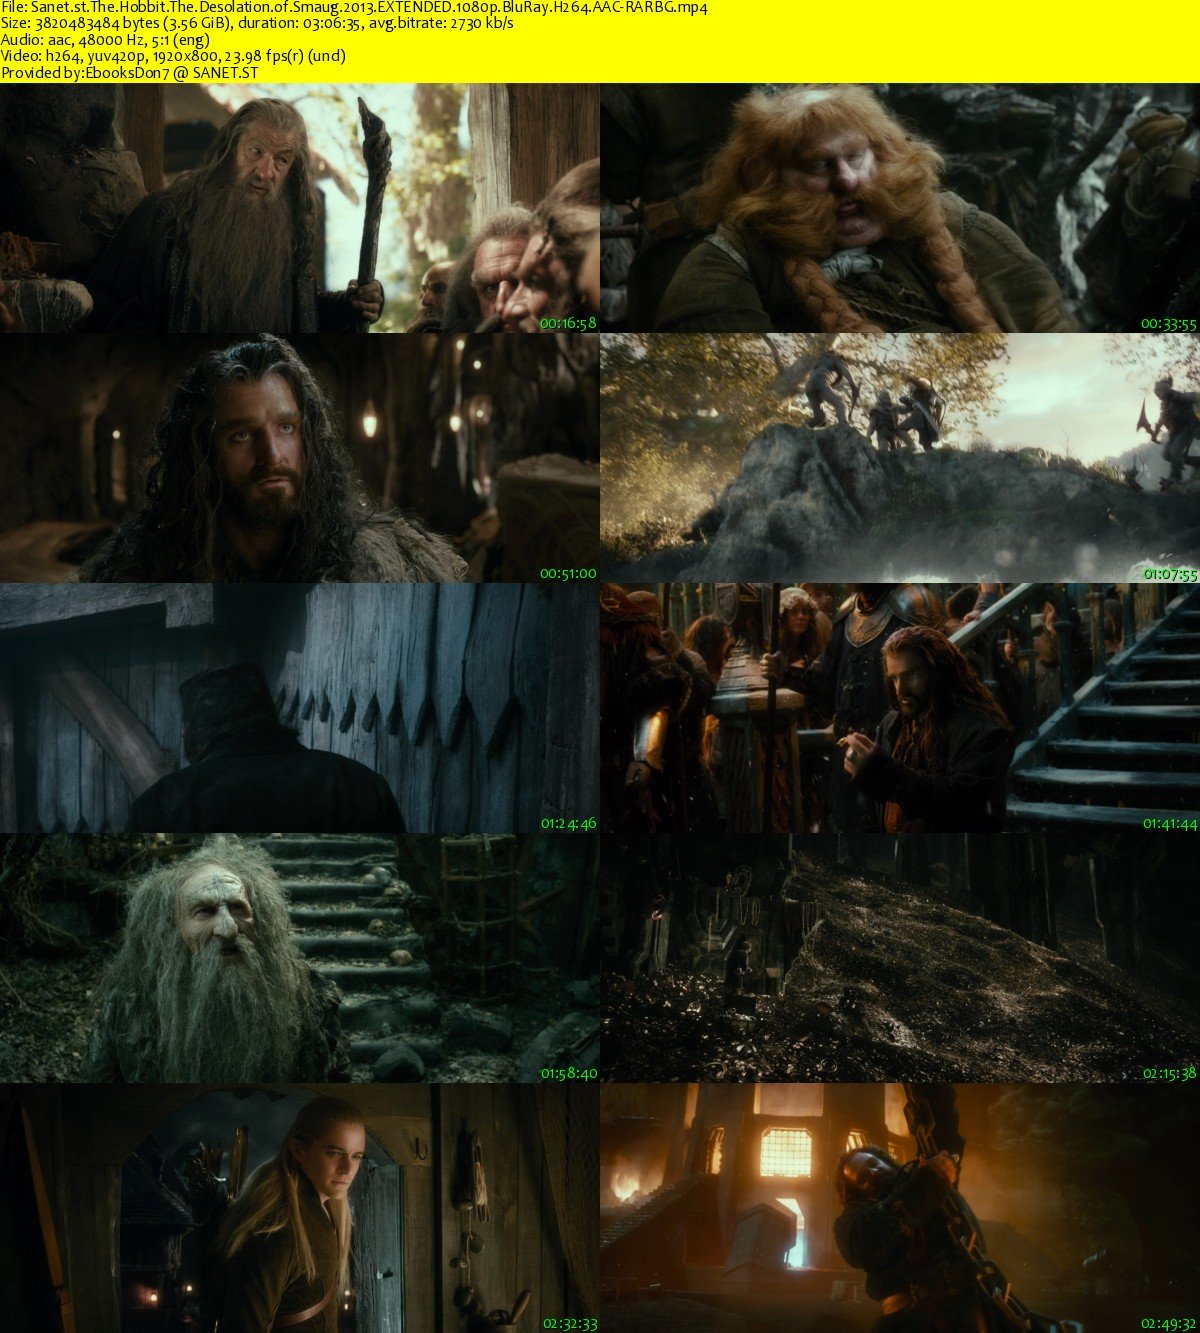 download the new version for windows The Hobbit: The Desolation of Smaug